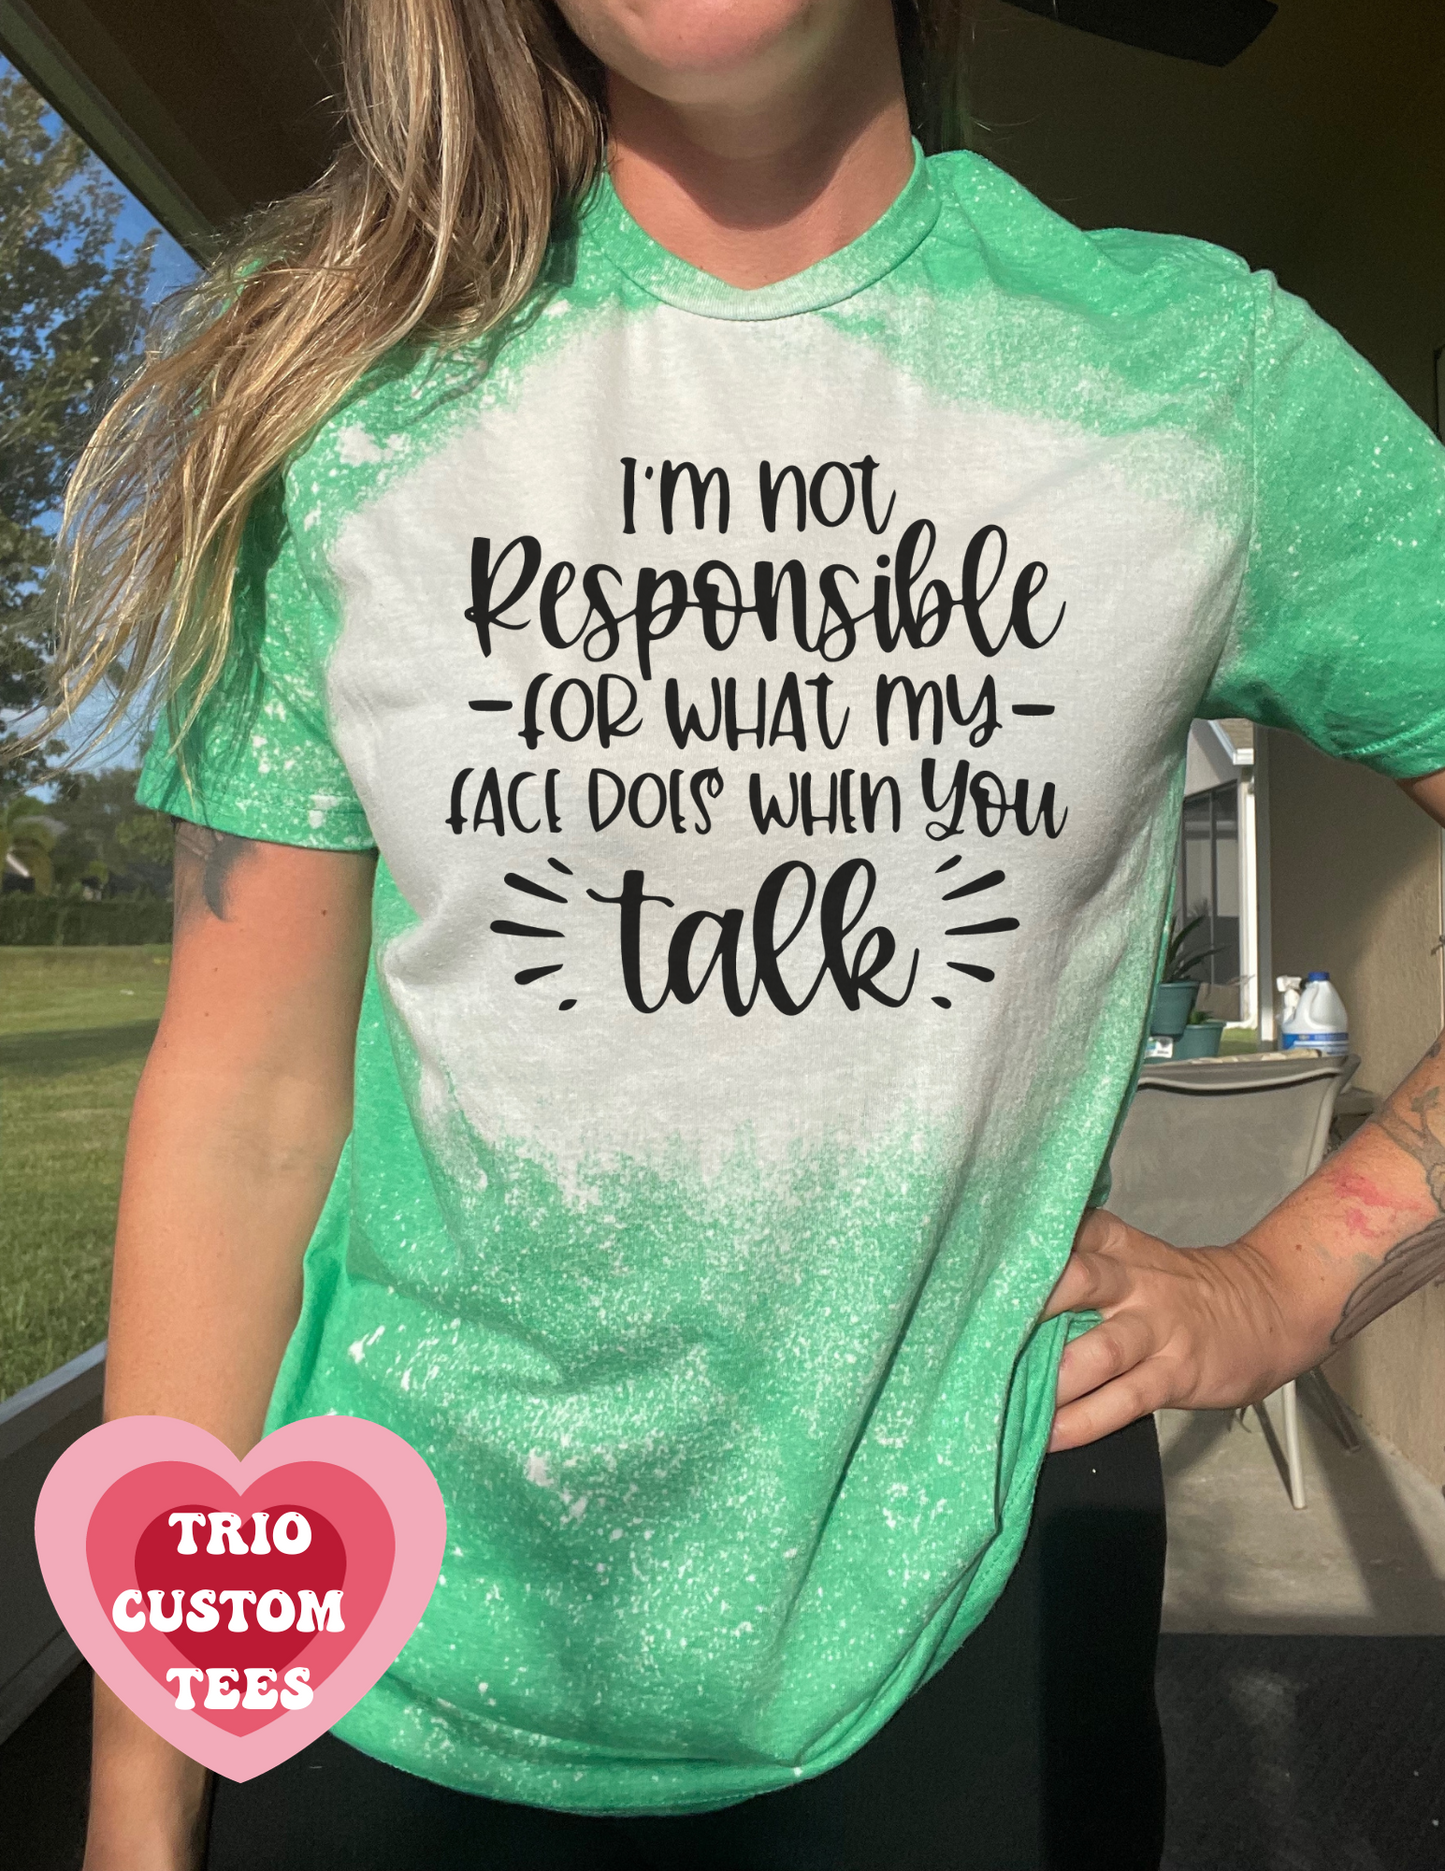 I'm Not Responsible for what my face says when you talk sarcasm funny Tee Shirt